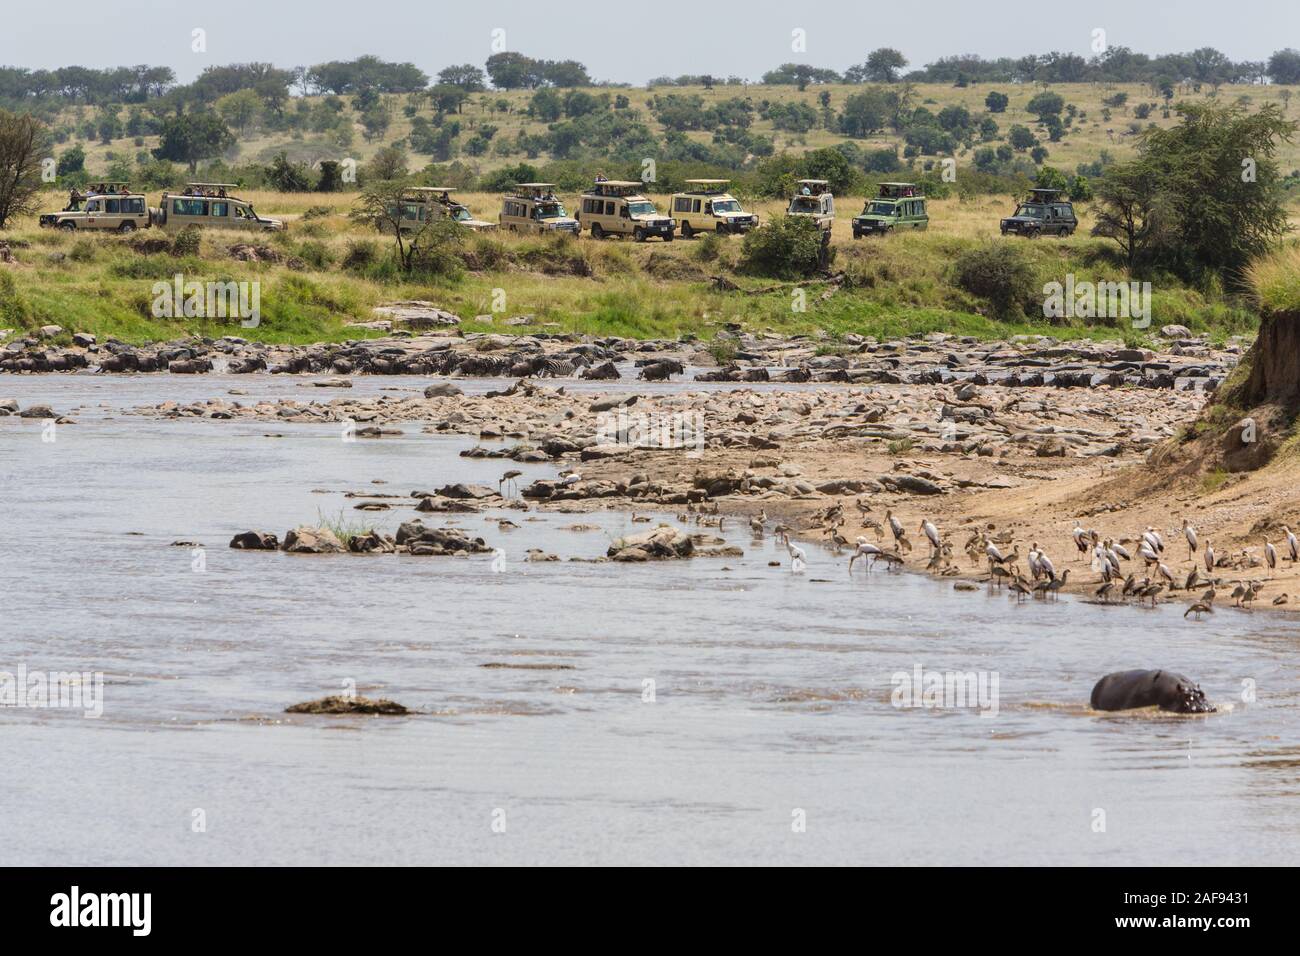 Tanzania. Serengeti. Vehicles Lined up to Watch Wildebeest Crossing of the Mara River on their Northward Migration. Hippo in lower right. Stock Photo